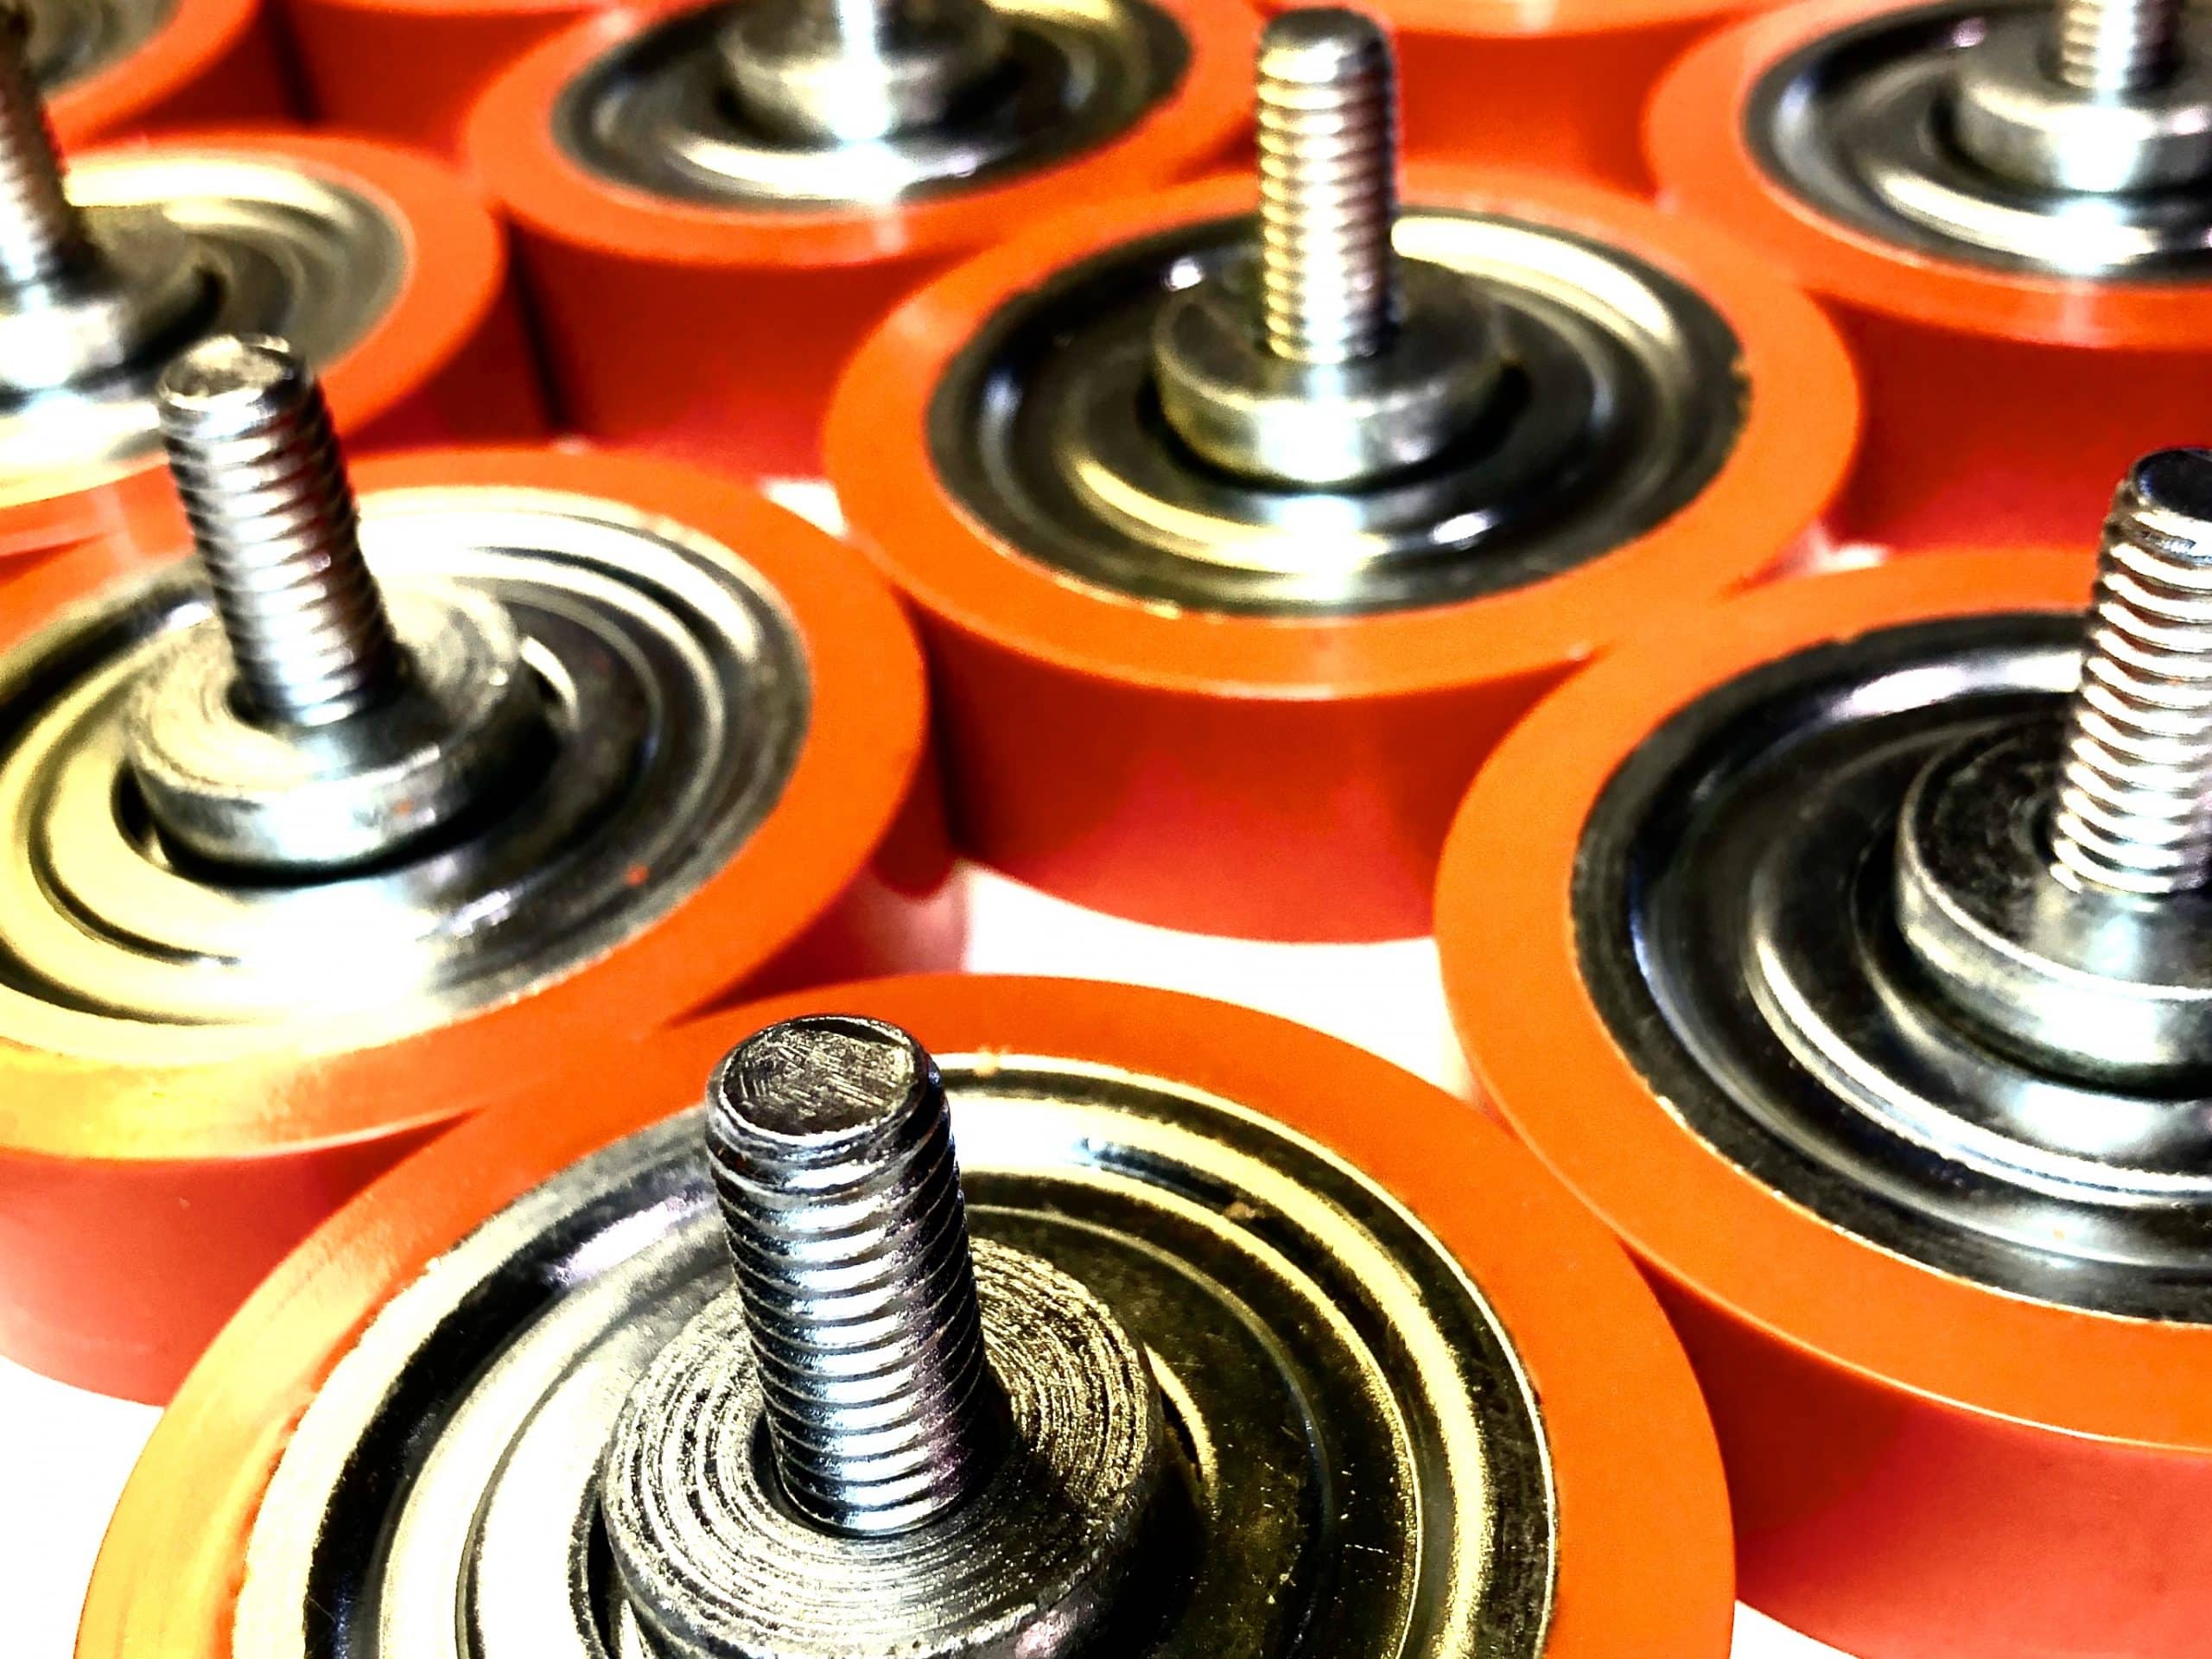 Male thread polyurethane rollers with ball bearing insert.